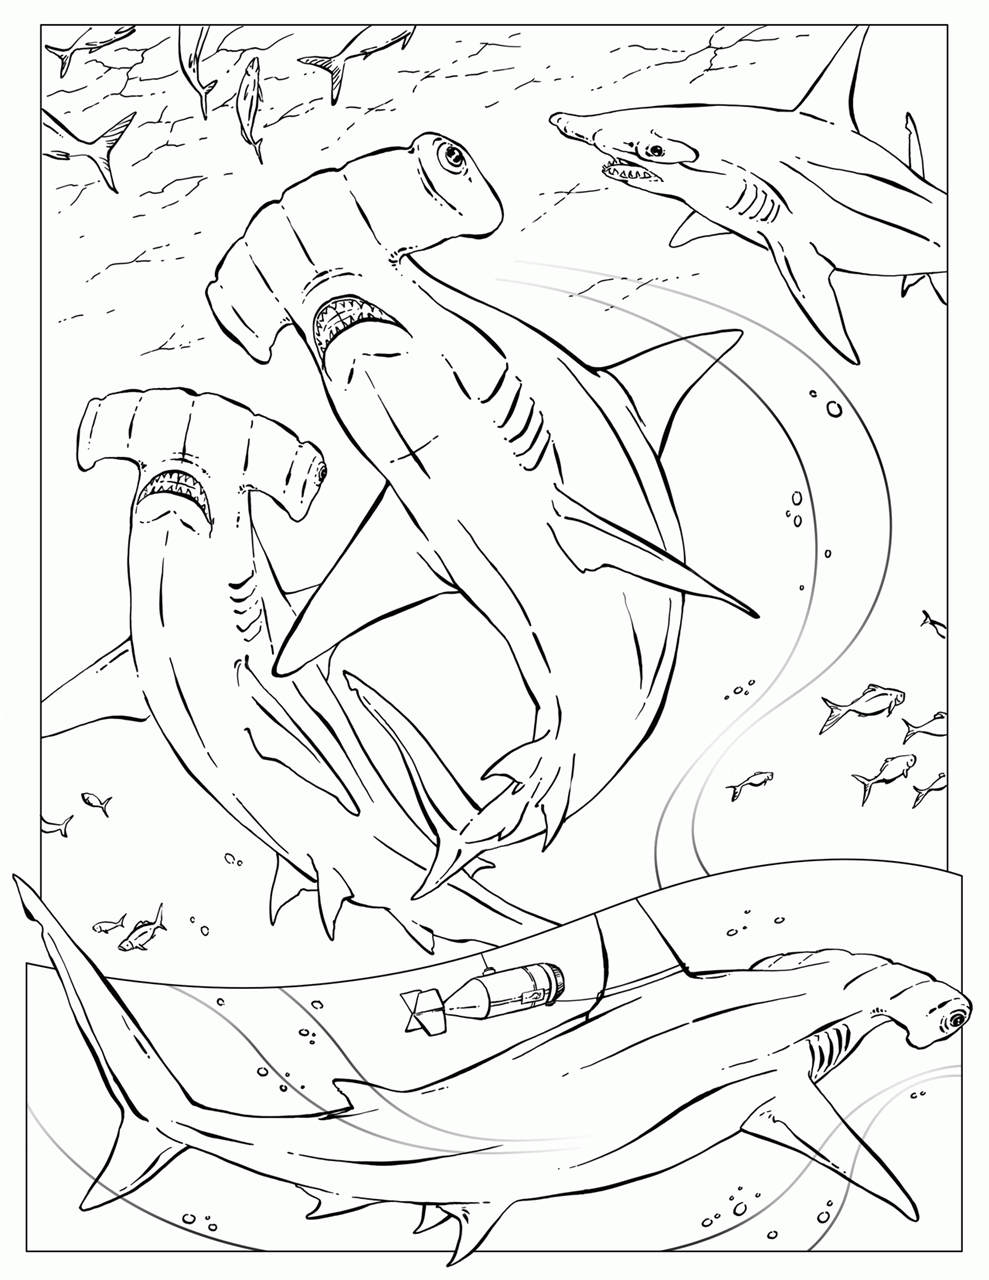 Free Hammerhead Shark and Bomb Coloring Pages printable